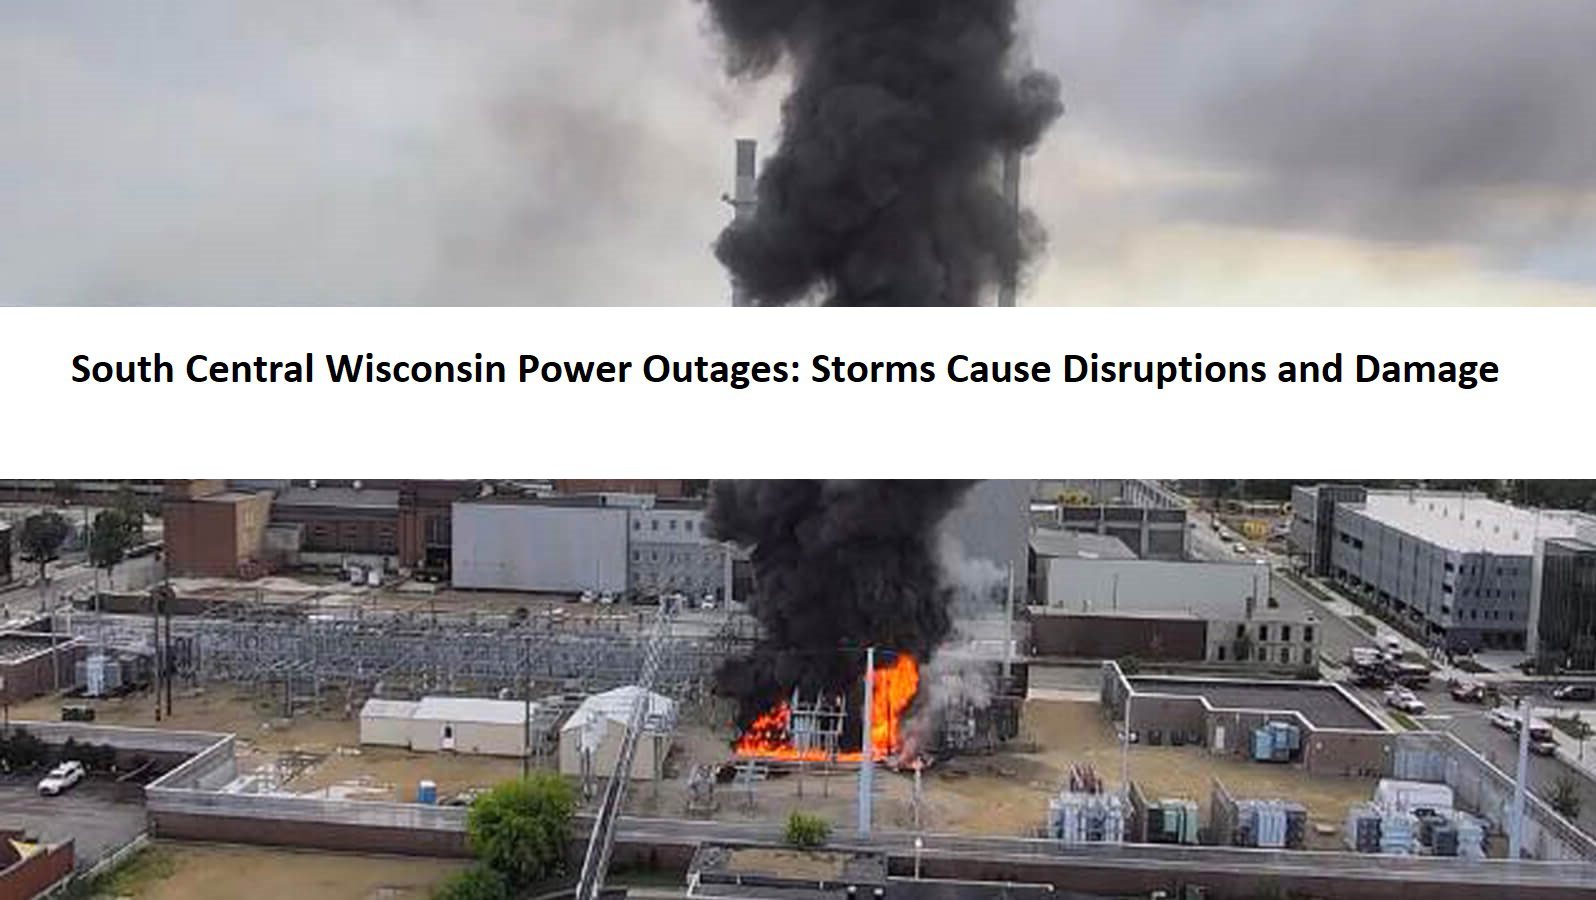 South Central Wisconsin Power Outages: Storms Cause Disruptions and Damage